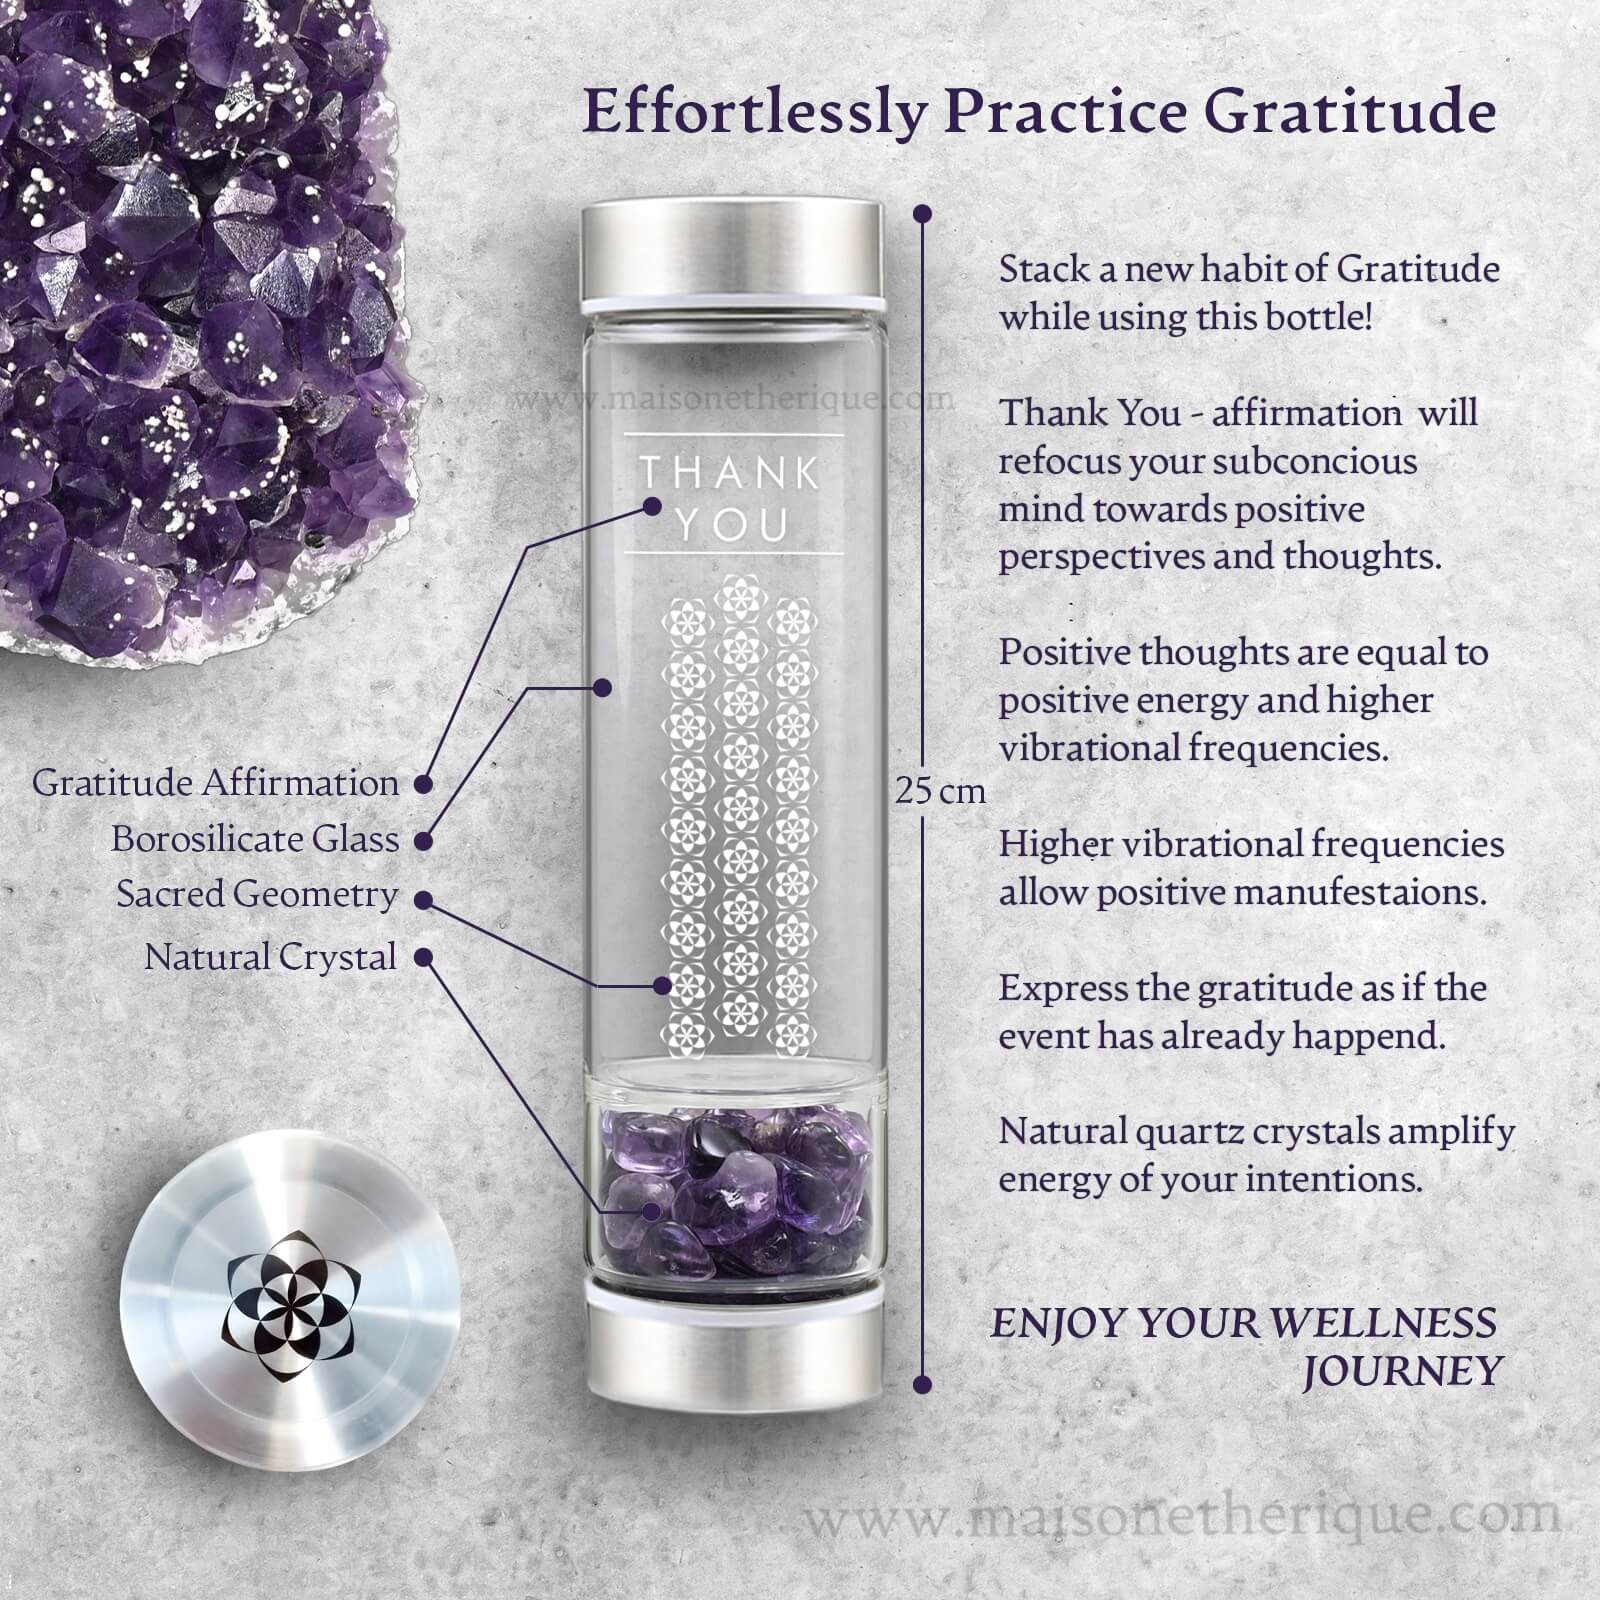 A Gratitude Crystal Bottle of Tumbled Amethyst with a gratitude guide